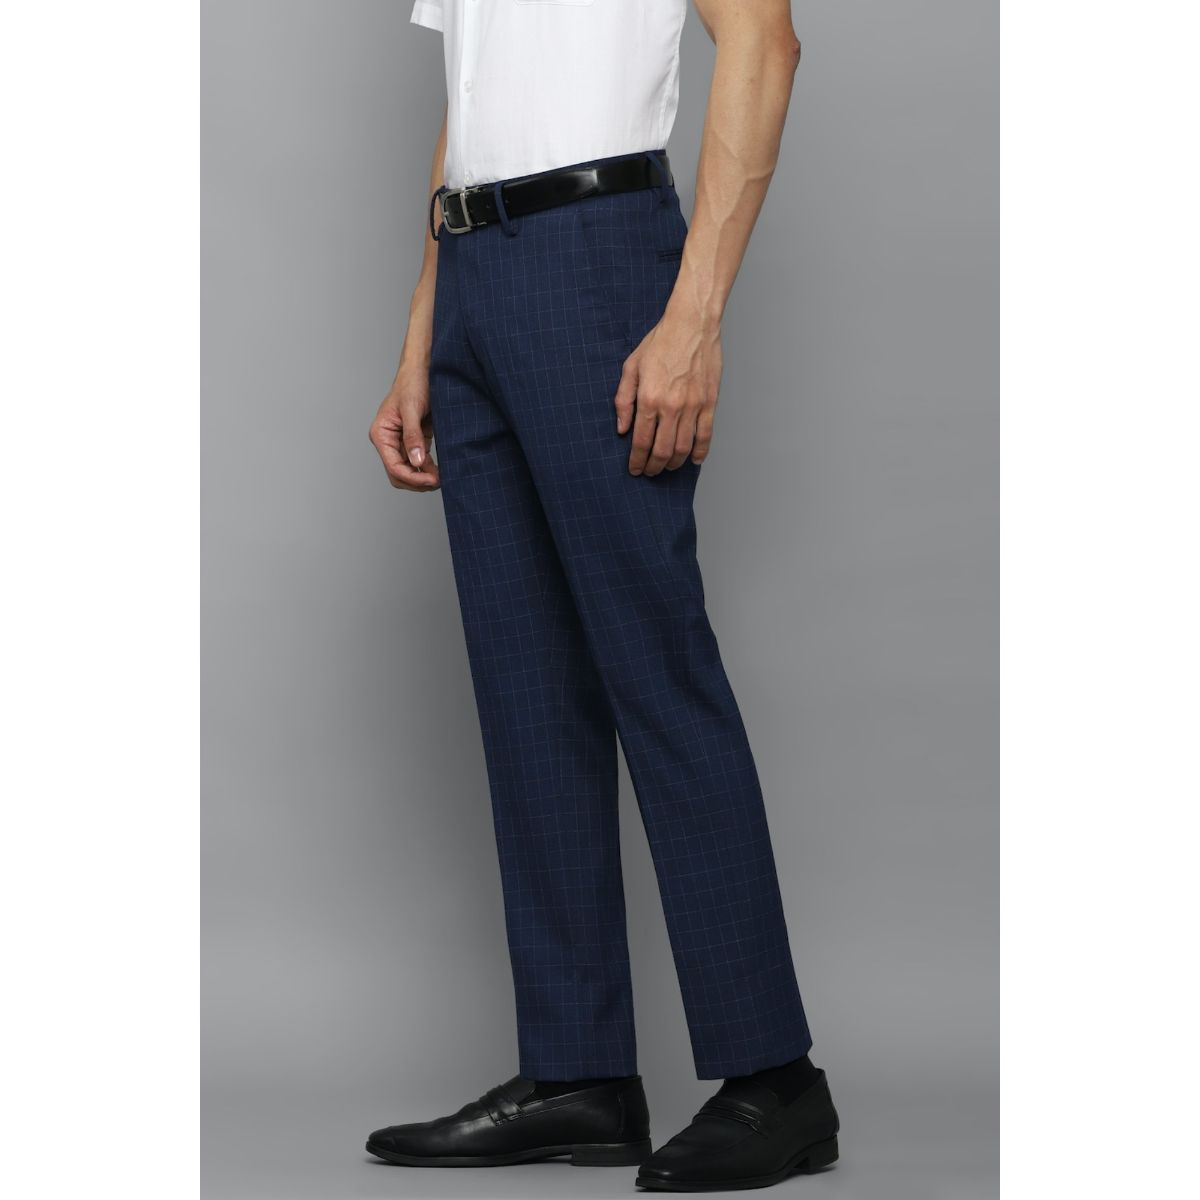 Buy Louis Philippe Men Blue Solid Slim fit Regular trousers Online at Low  Prices in India - Paytmmall.com